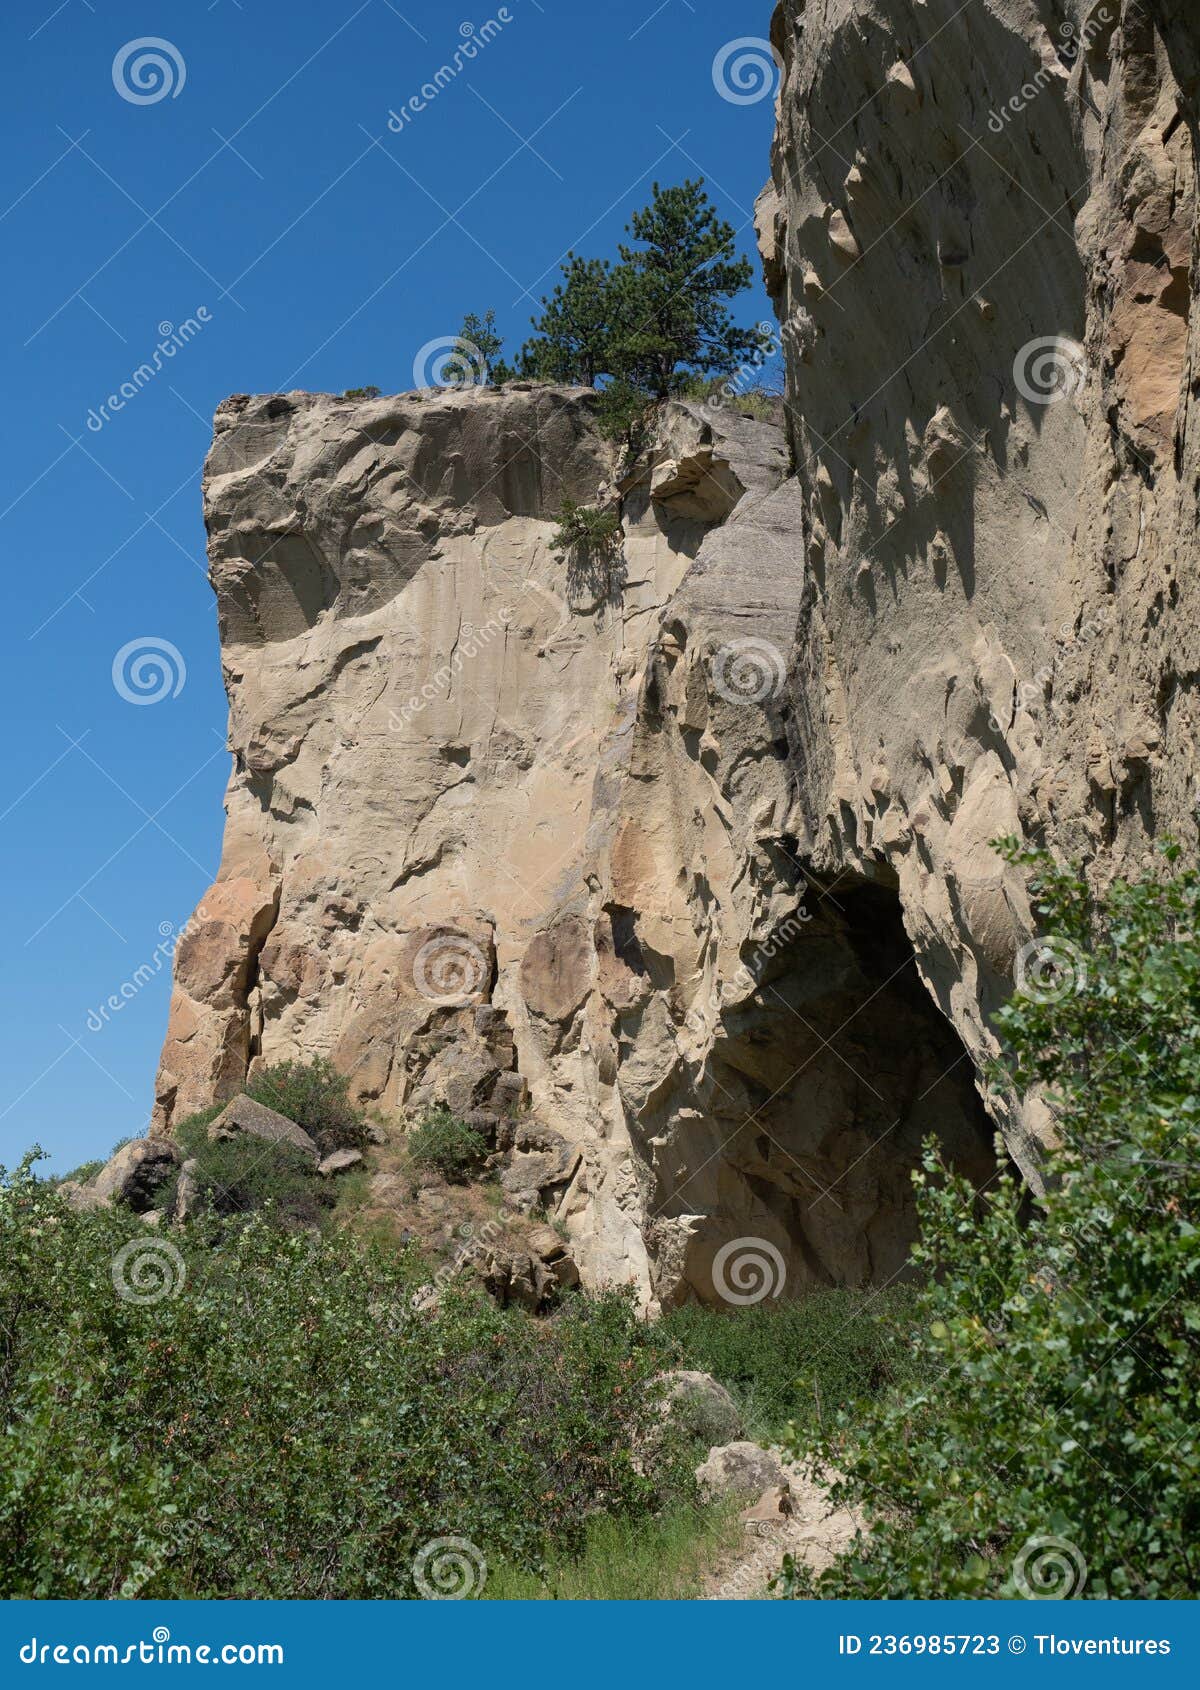 trail leading to cave opening at pictograph cave state park near billings, montana